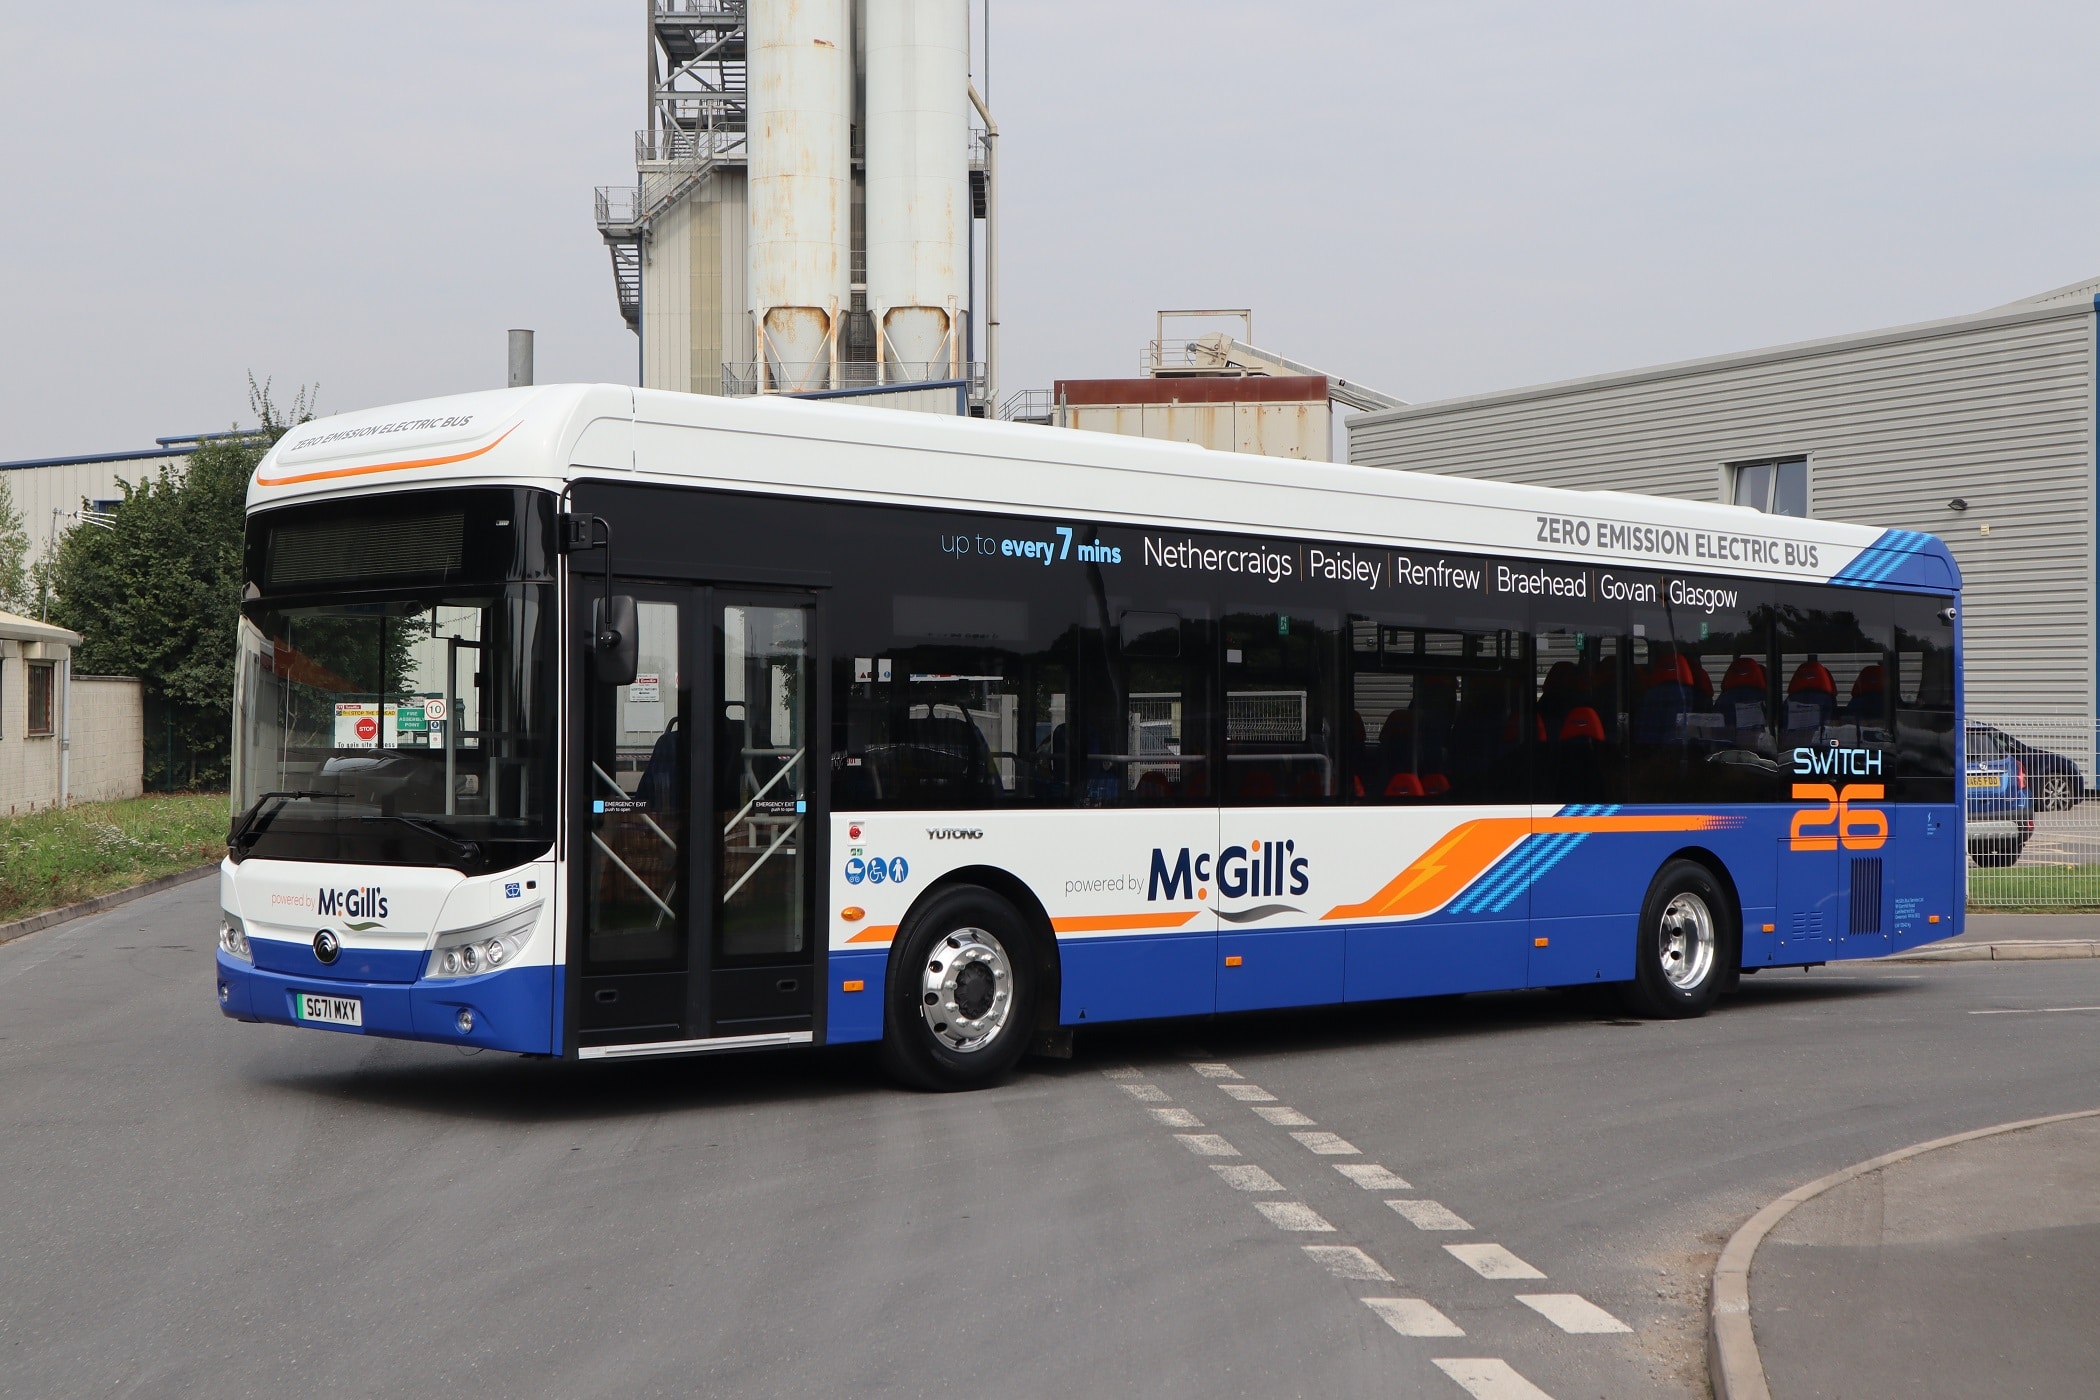 55 Yutong E12 electric buses being delivered to McGill's